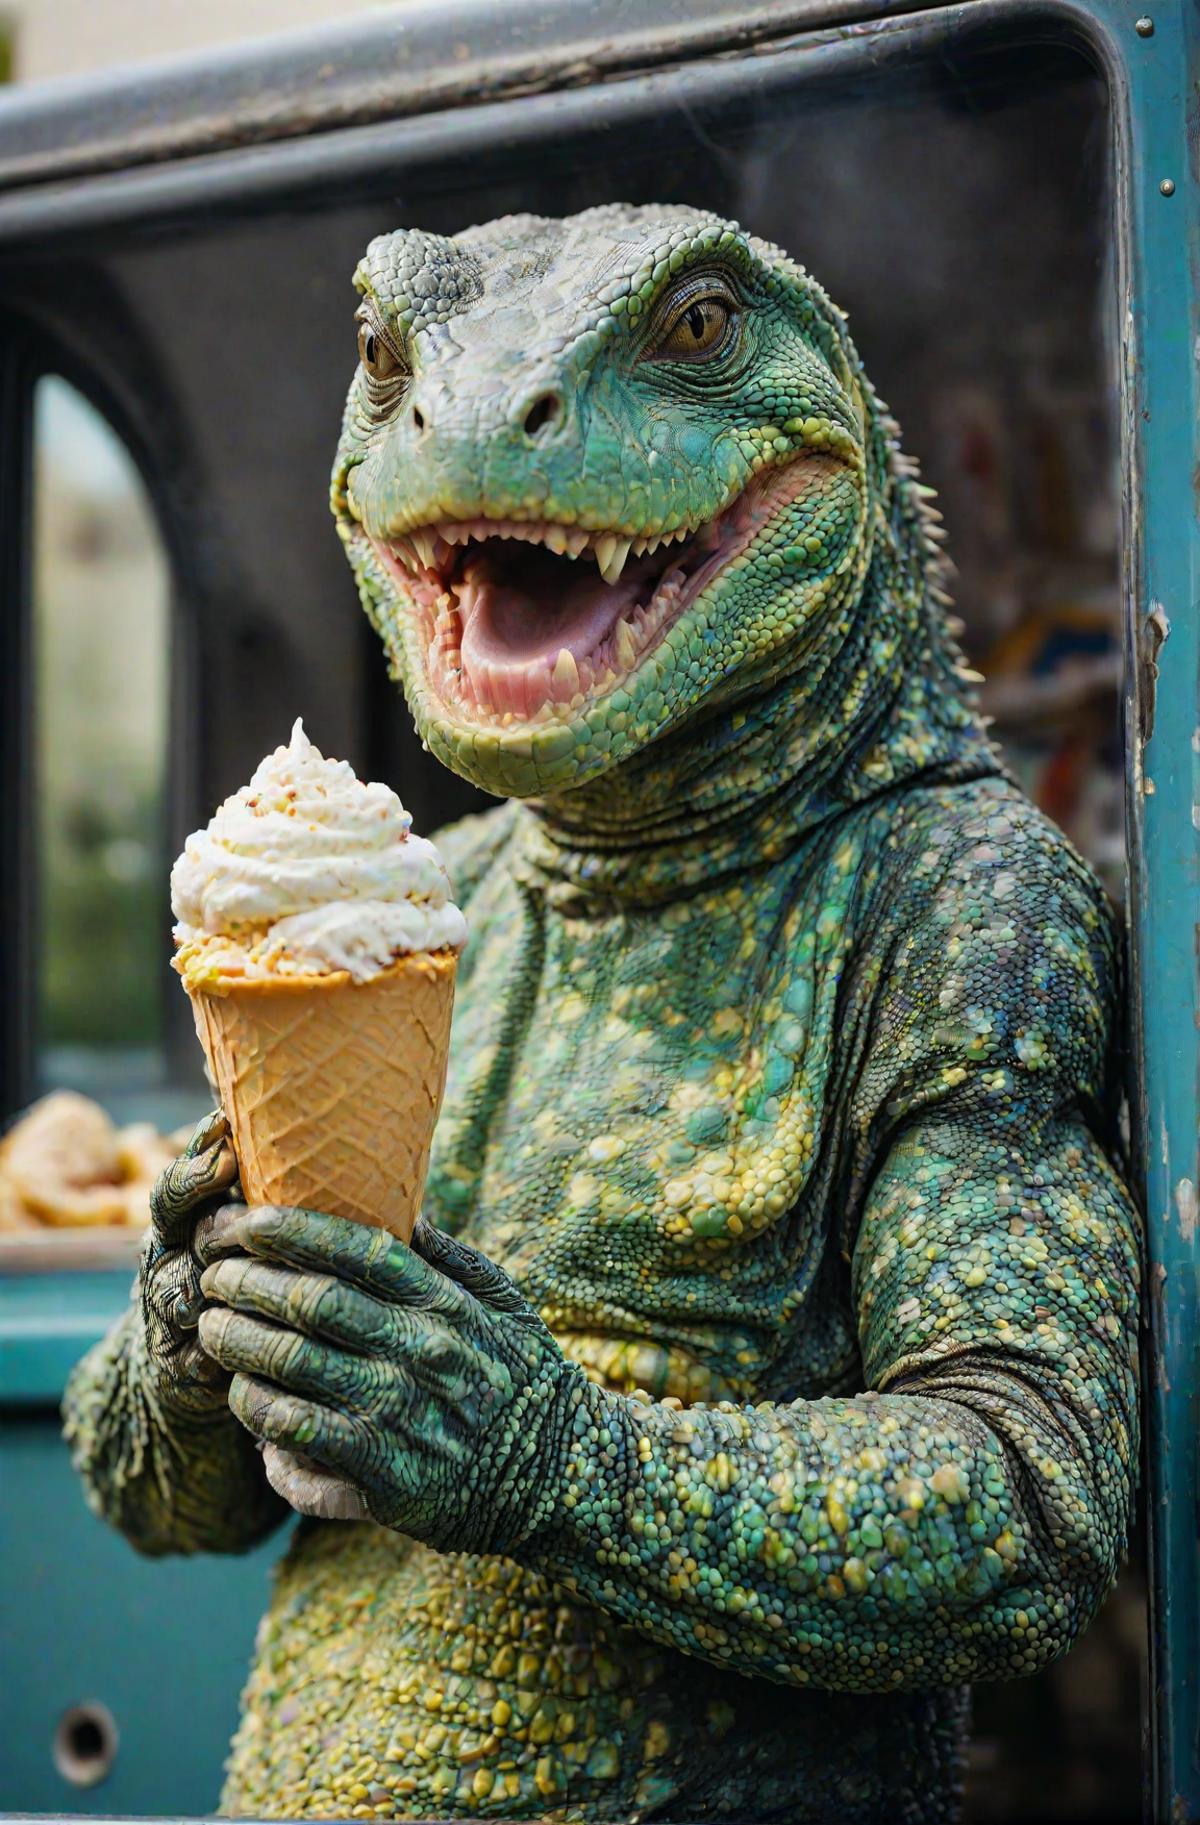 A man dressed as a lizard holding a large ice cream cone.